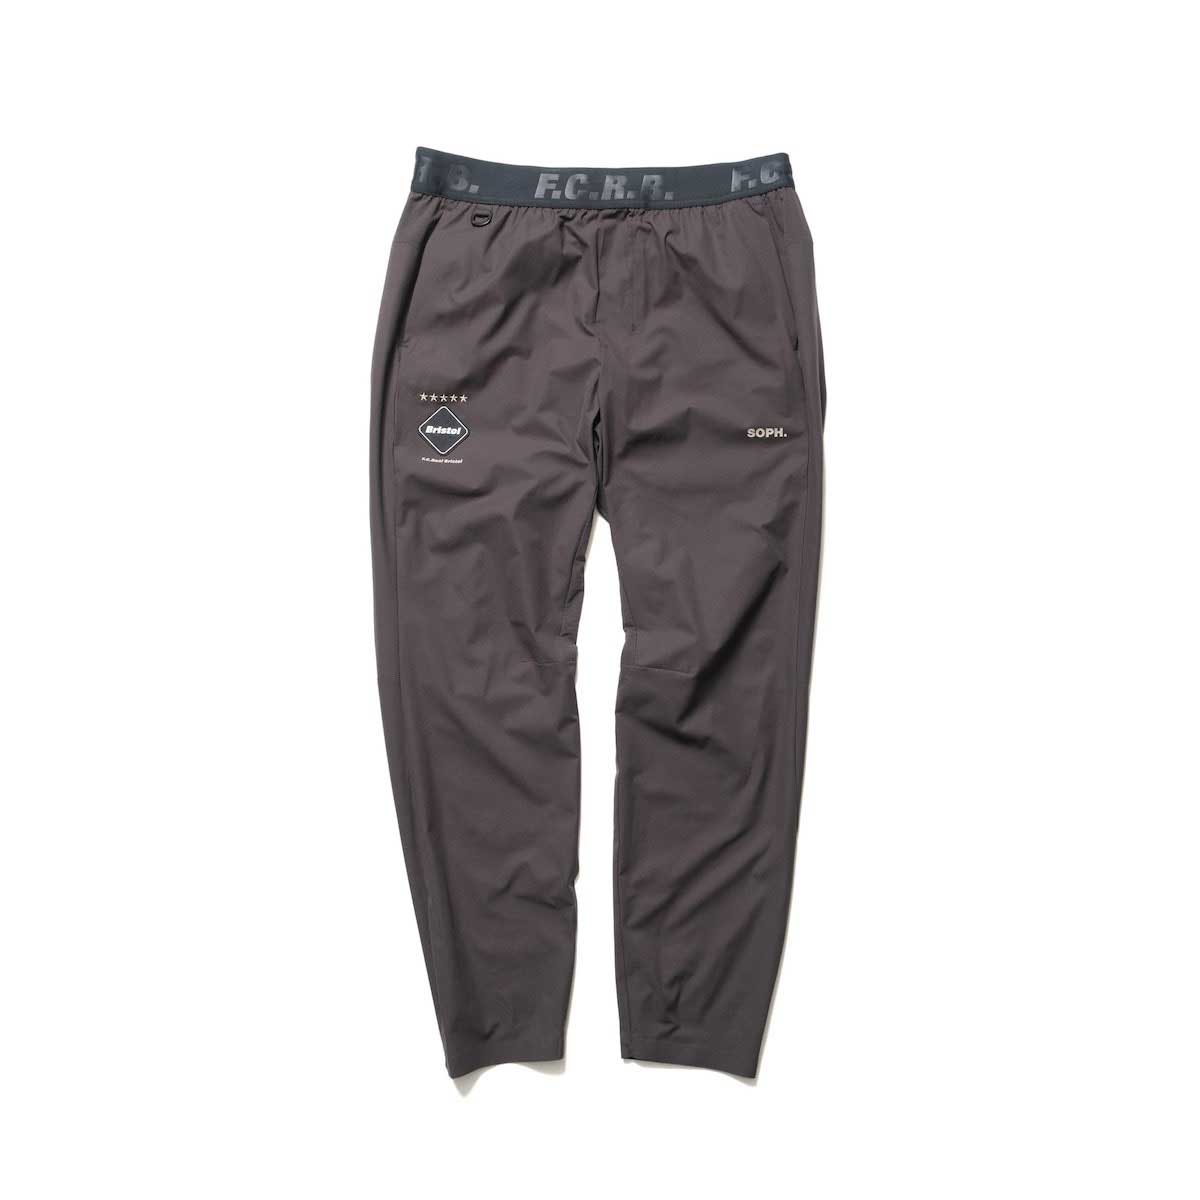 F.C.Real Bristol / STRETCH LIGHT WEIGHT TAPERED EASY PANTS(Brown)